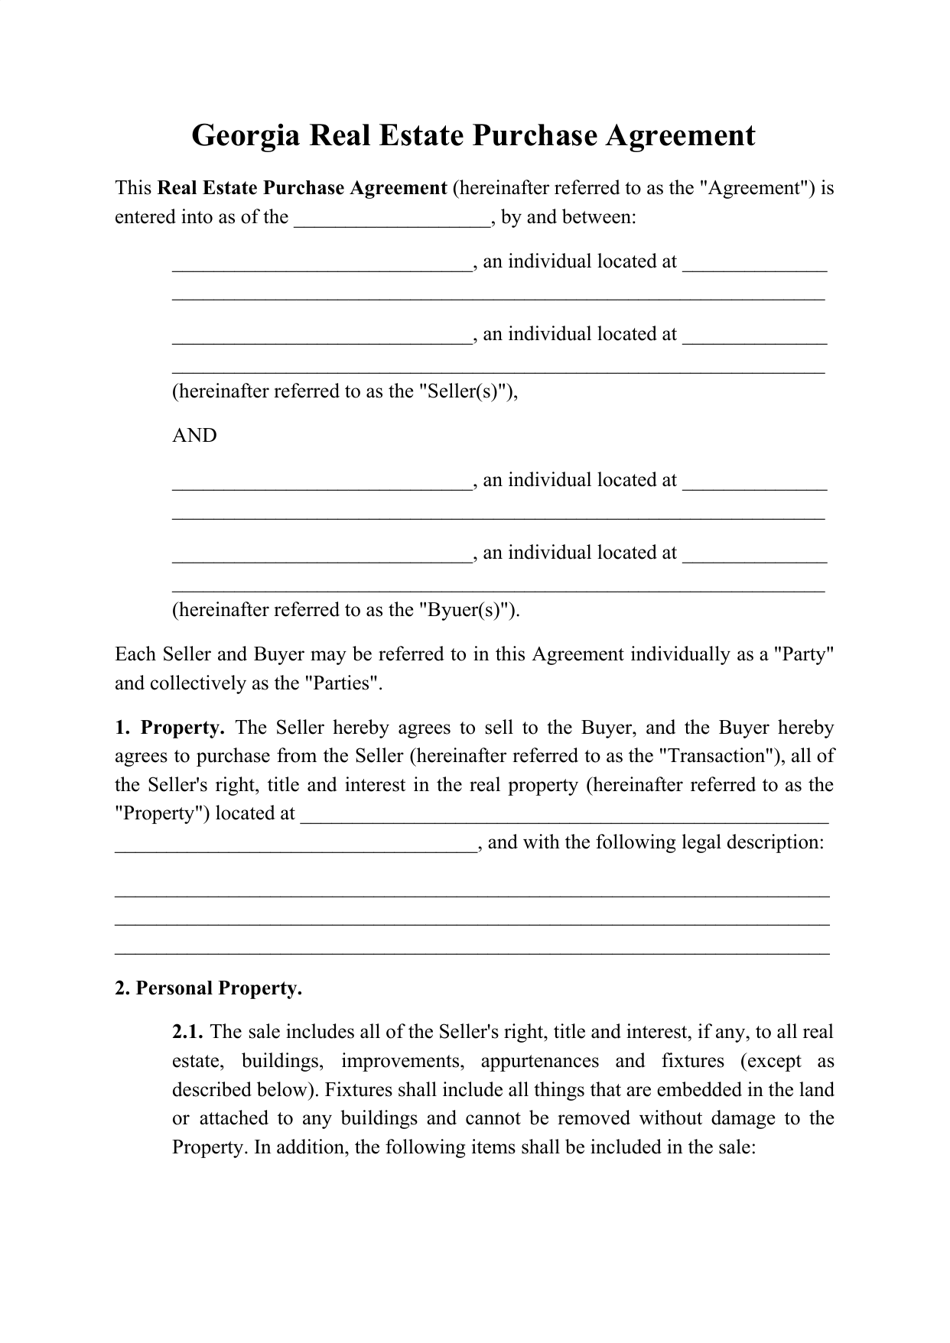 Real Estate Purchase Agreement Template - Georgia (United States), Page 1